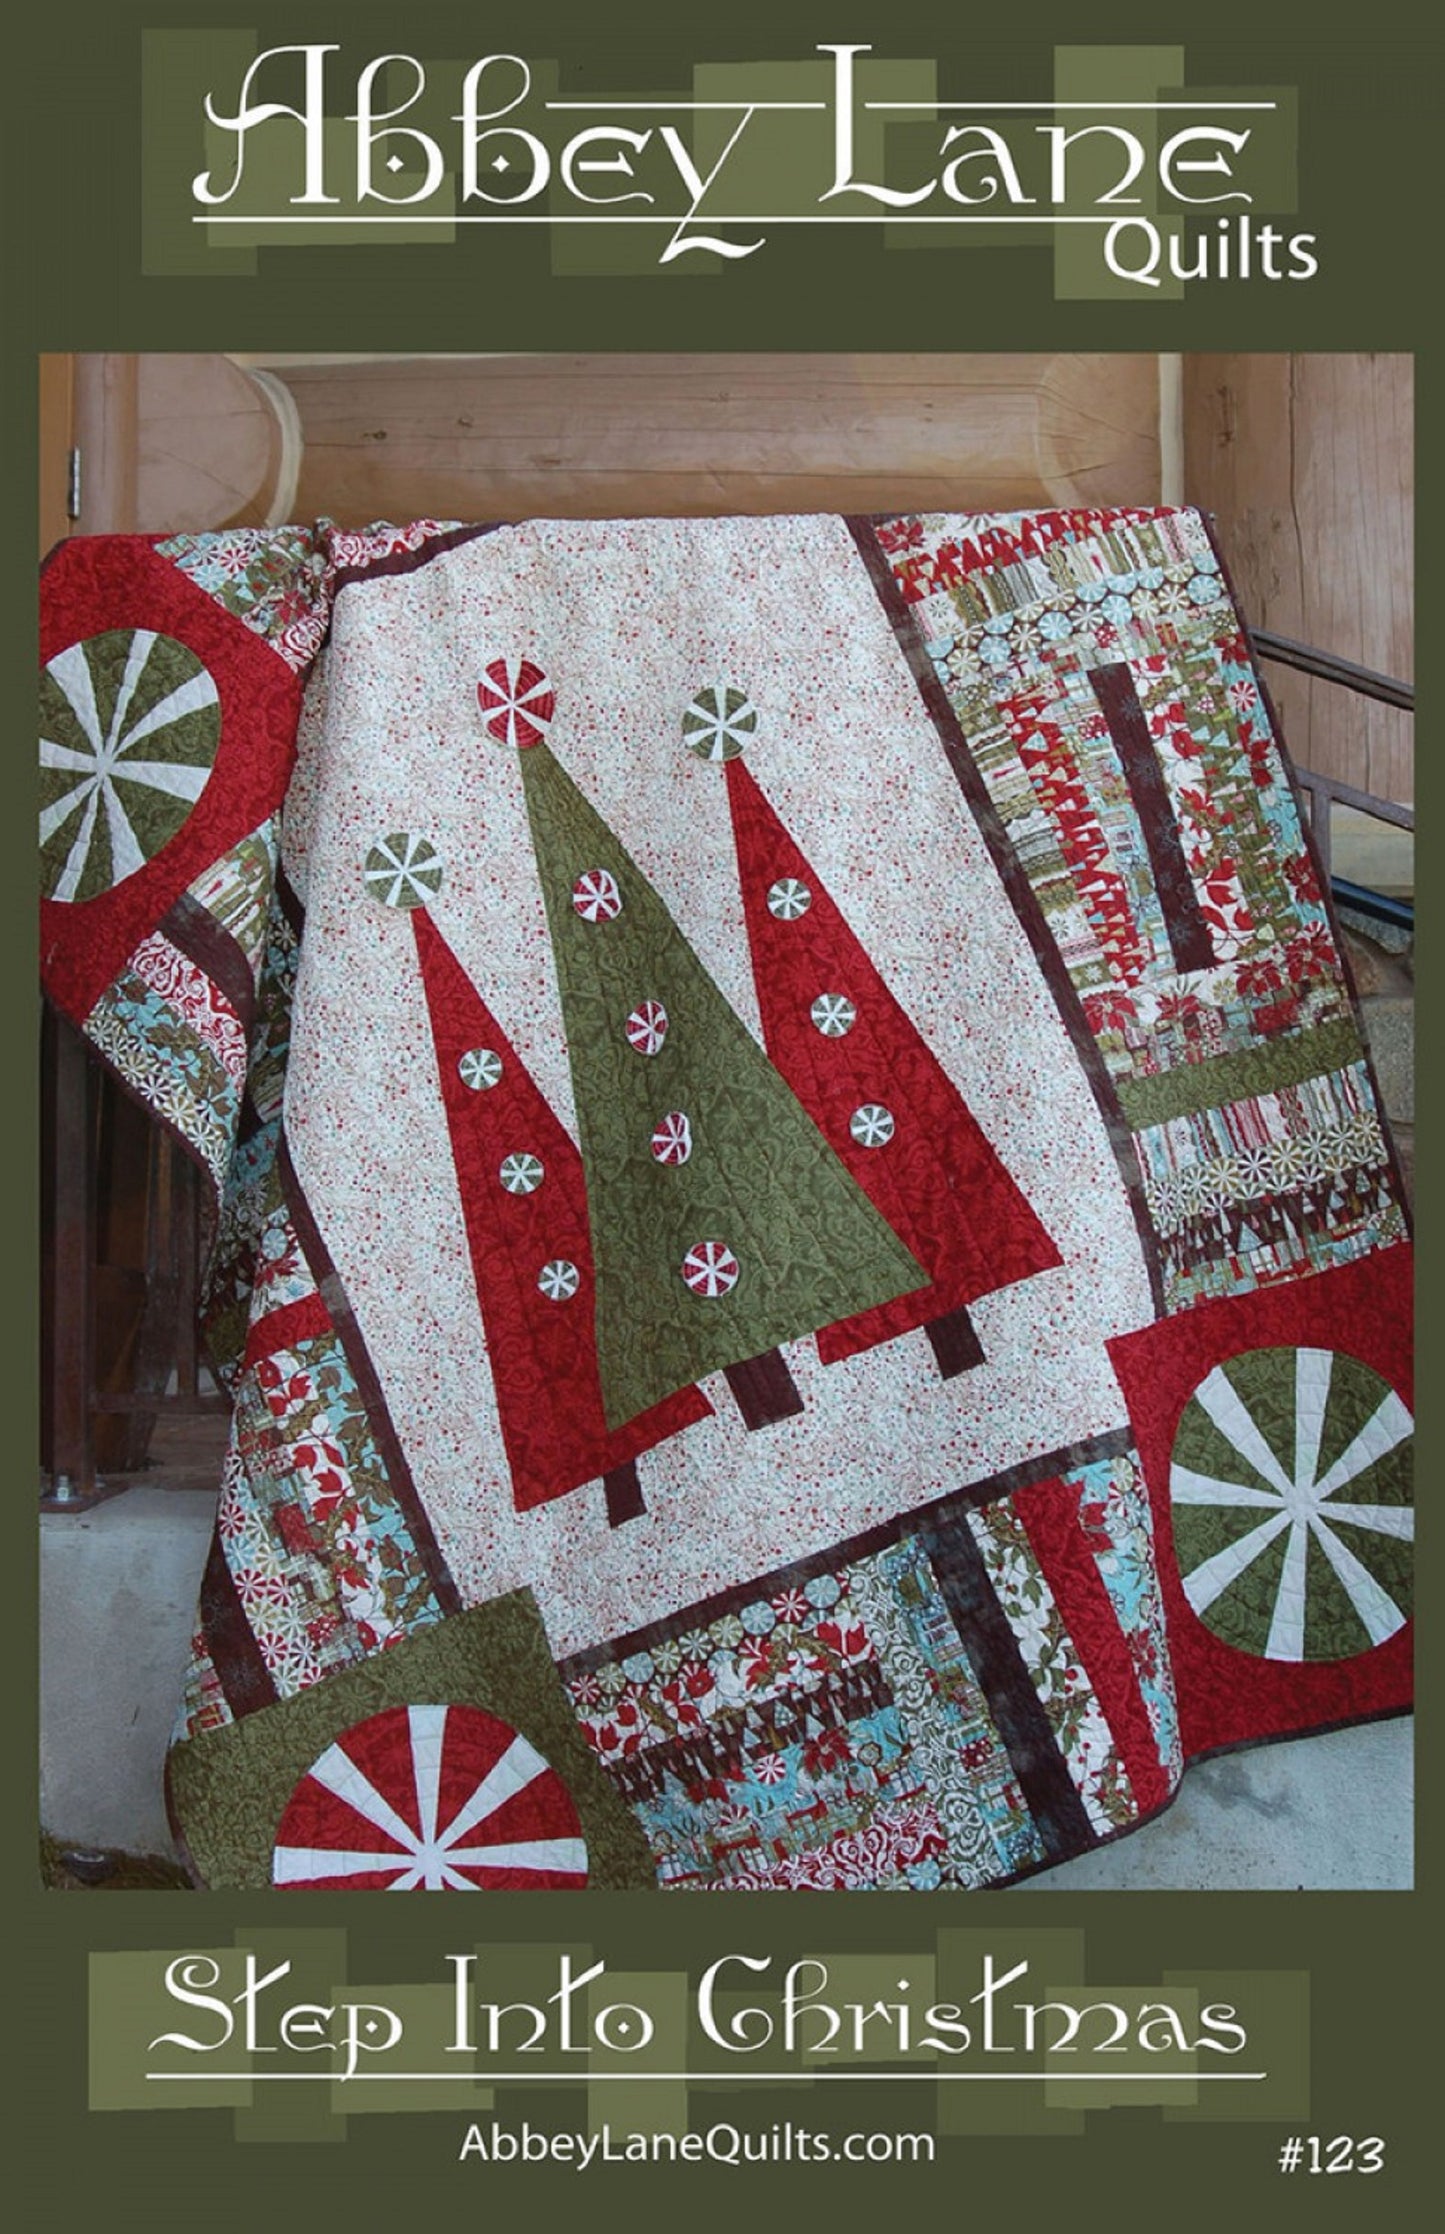 Step Into Christmas Quilt Pattern by Abbey Lane Quilts